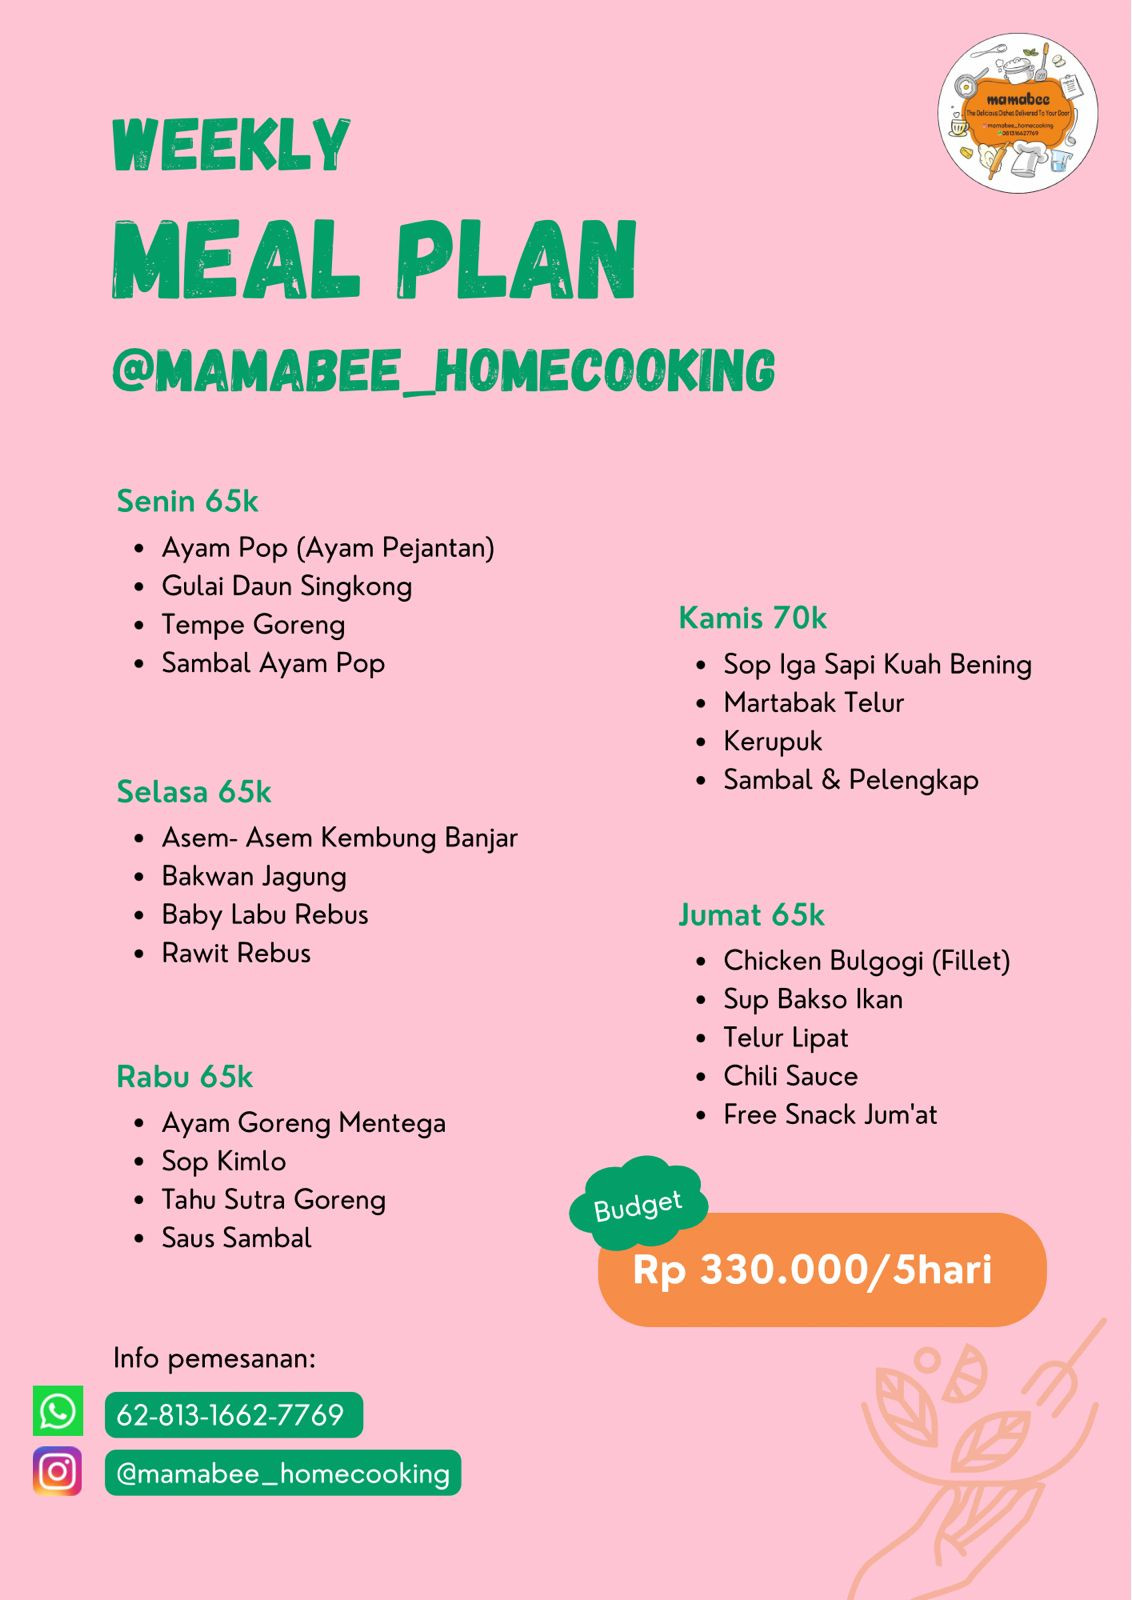 Daily Catering (Kamis)